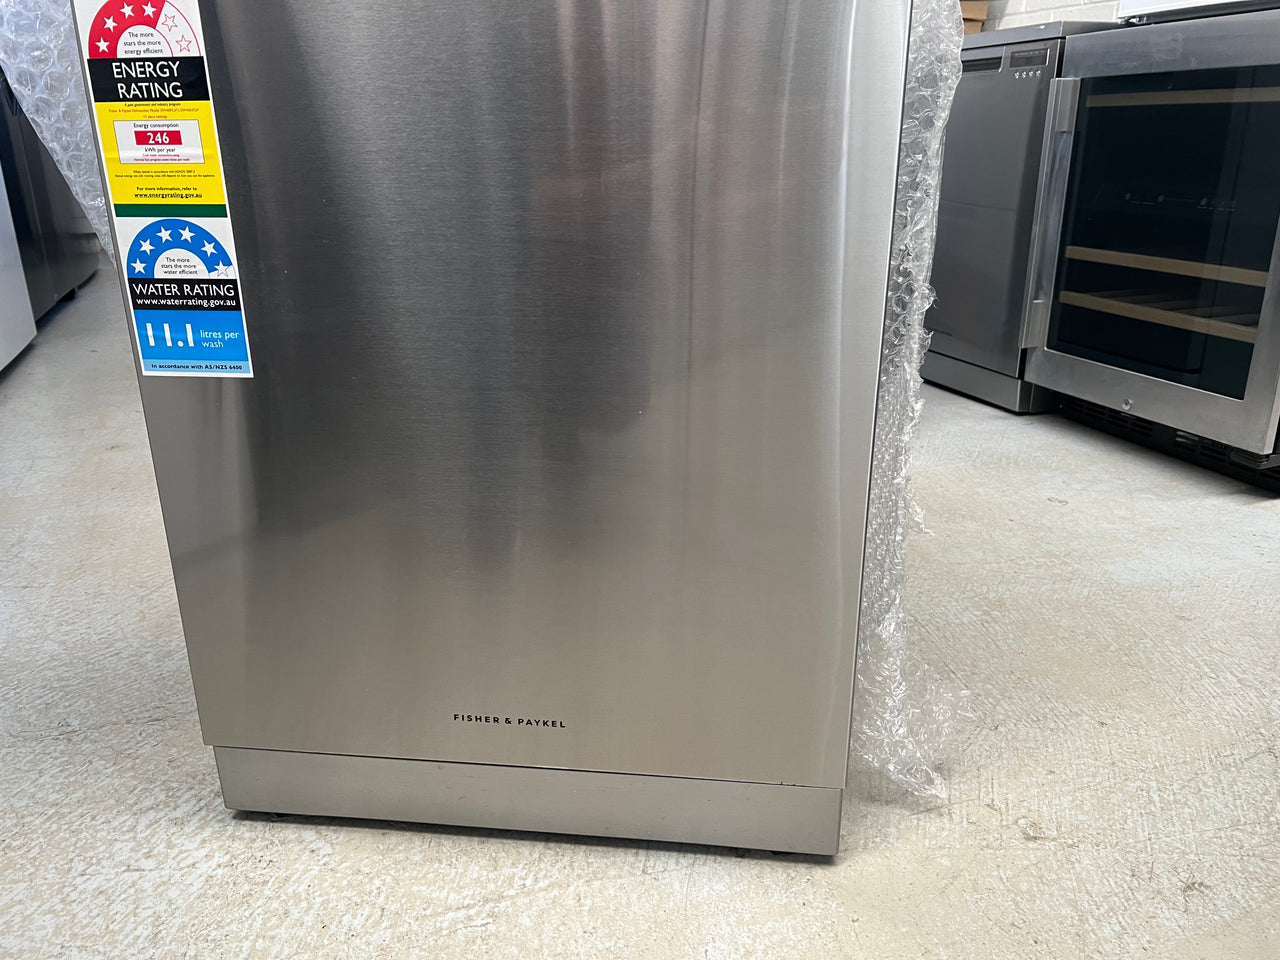 Factory second Fisher & Paykel 60cm Stainless Steel 15 place setting Dishwasher DW60FC6X1 - Second Hand Appliances Geebung